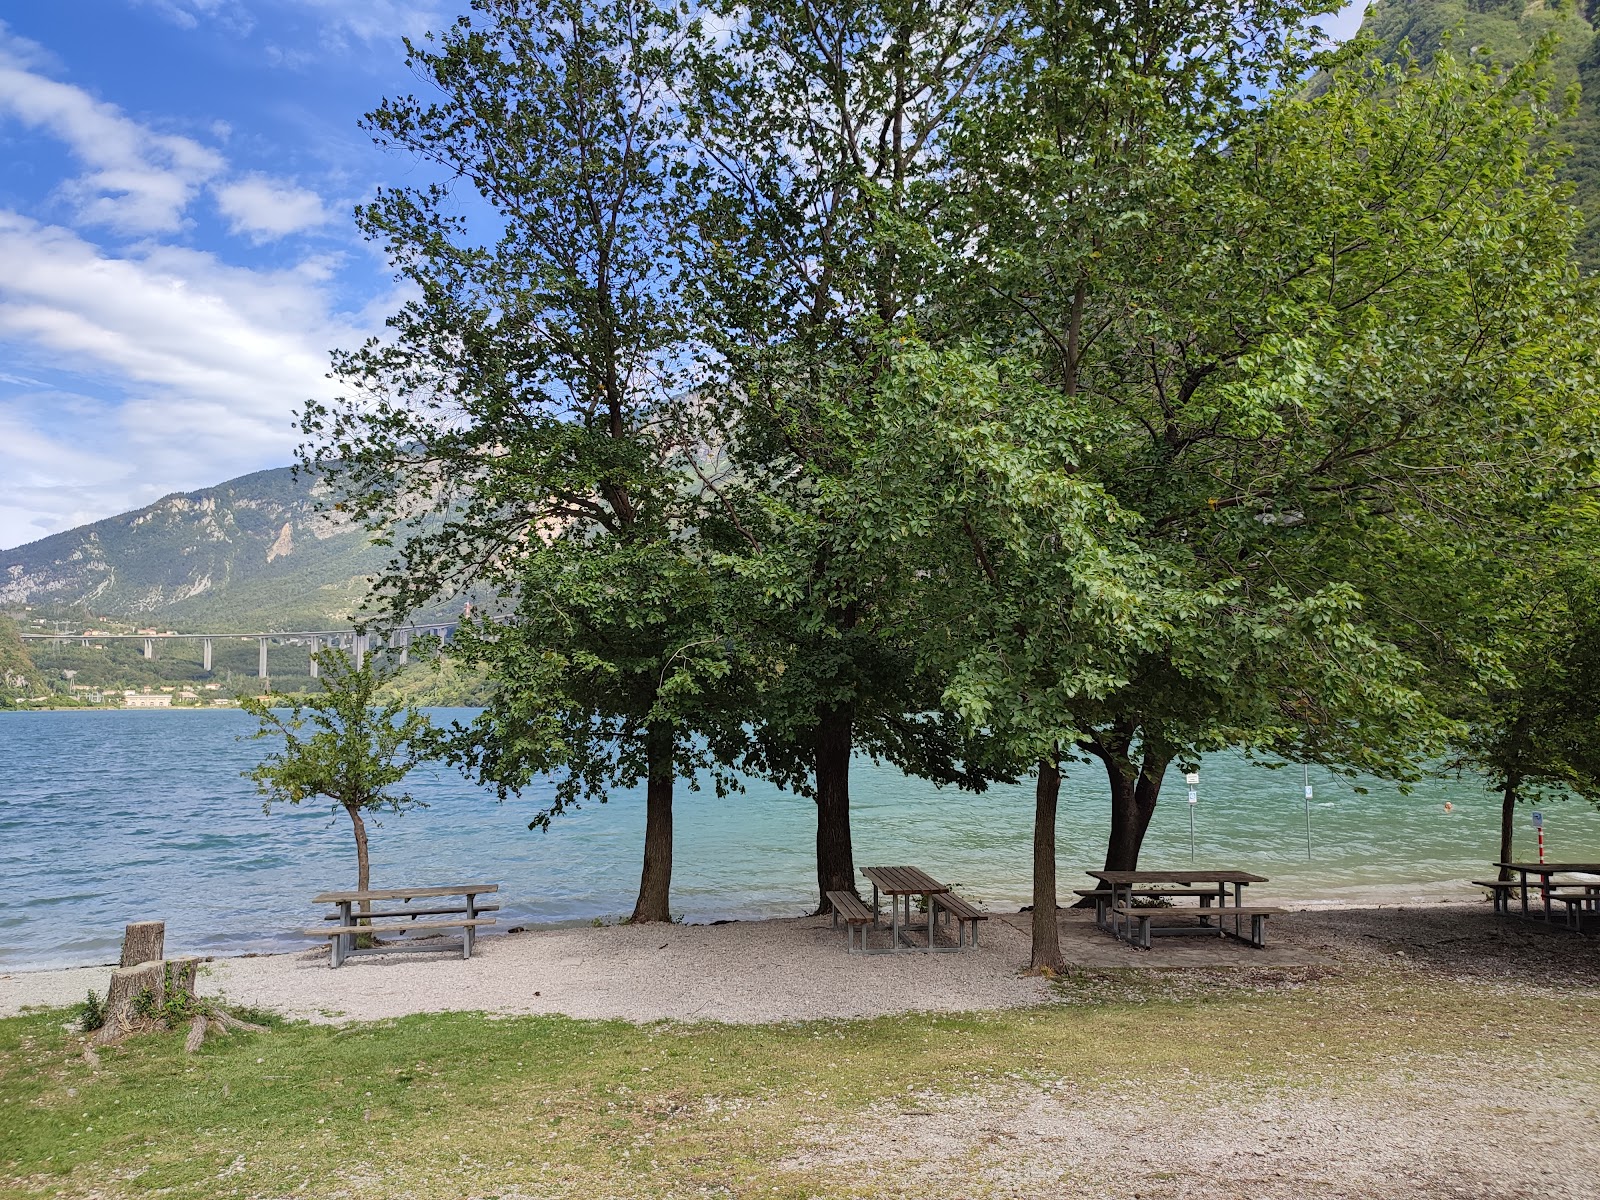 Photo of Lago Morto beach - popular place among relax connoisseurs